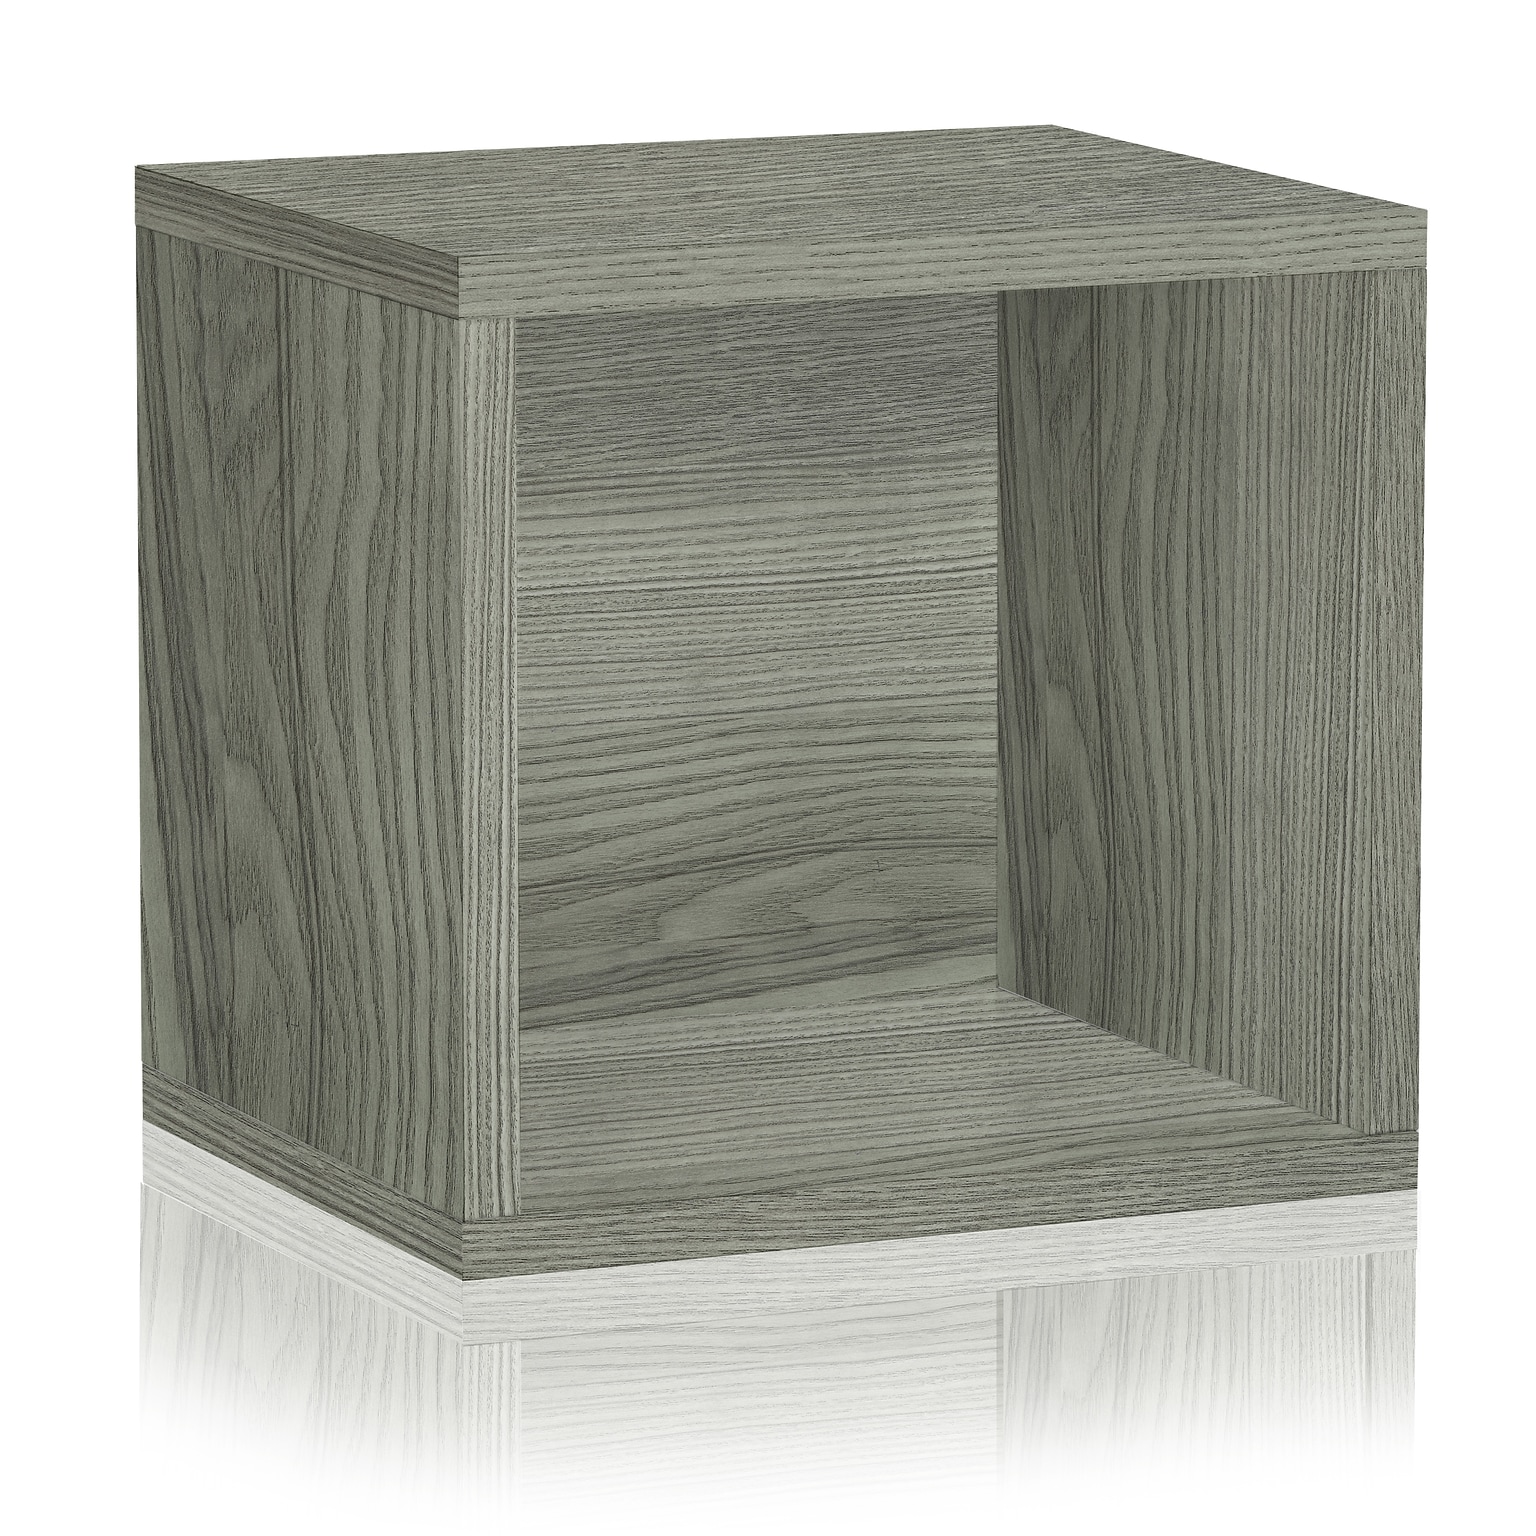 Way Basics 12.6H x 13.4W Stackable Modular Connect Open Cube Modern Eco Storage System, Gray Wood Grain (C-OCUBE-GY)